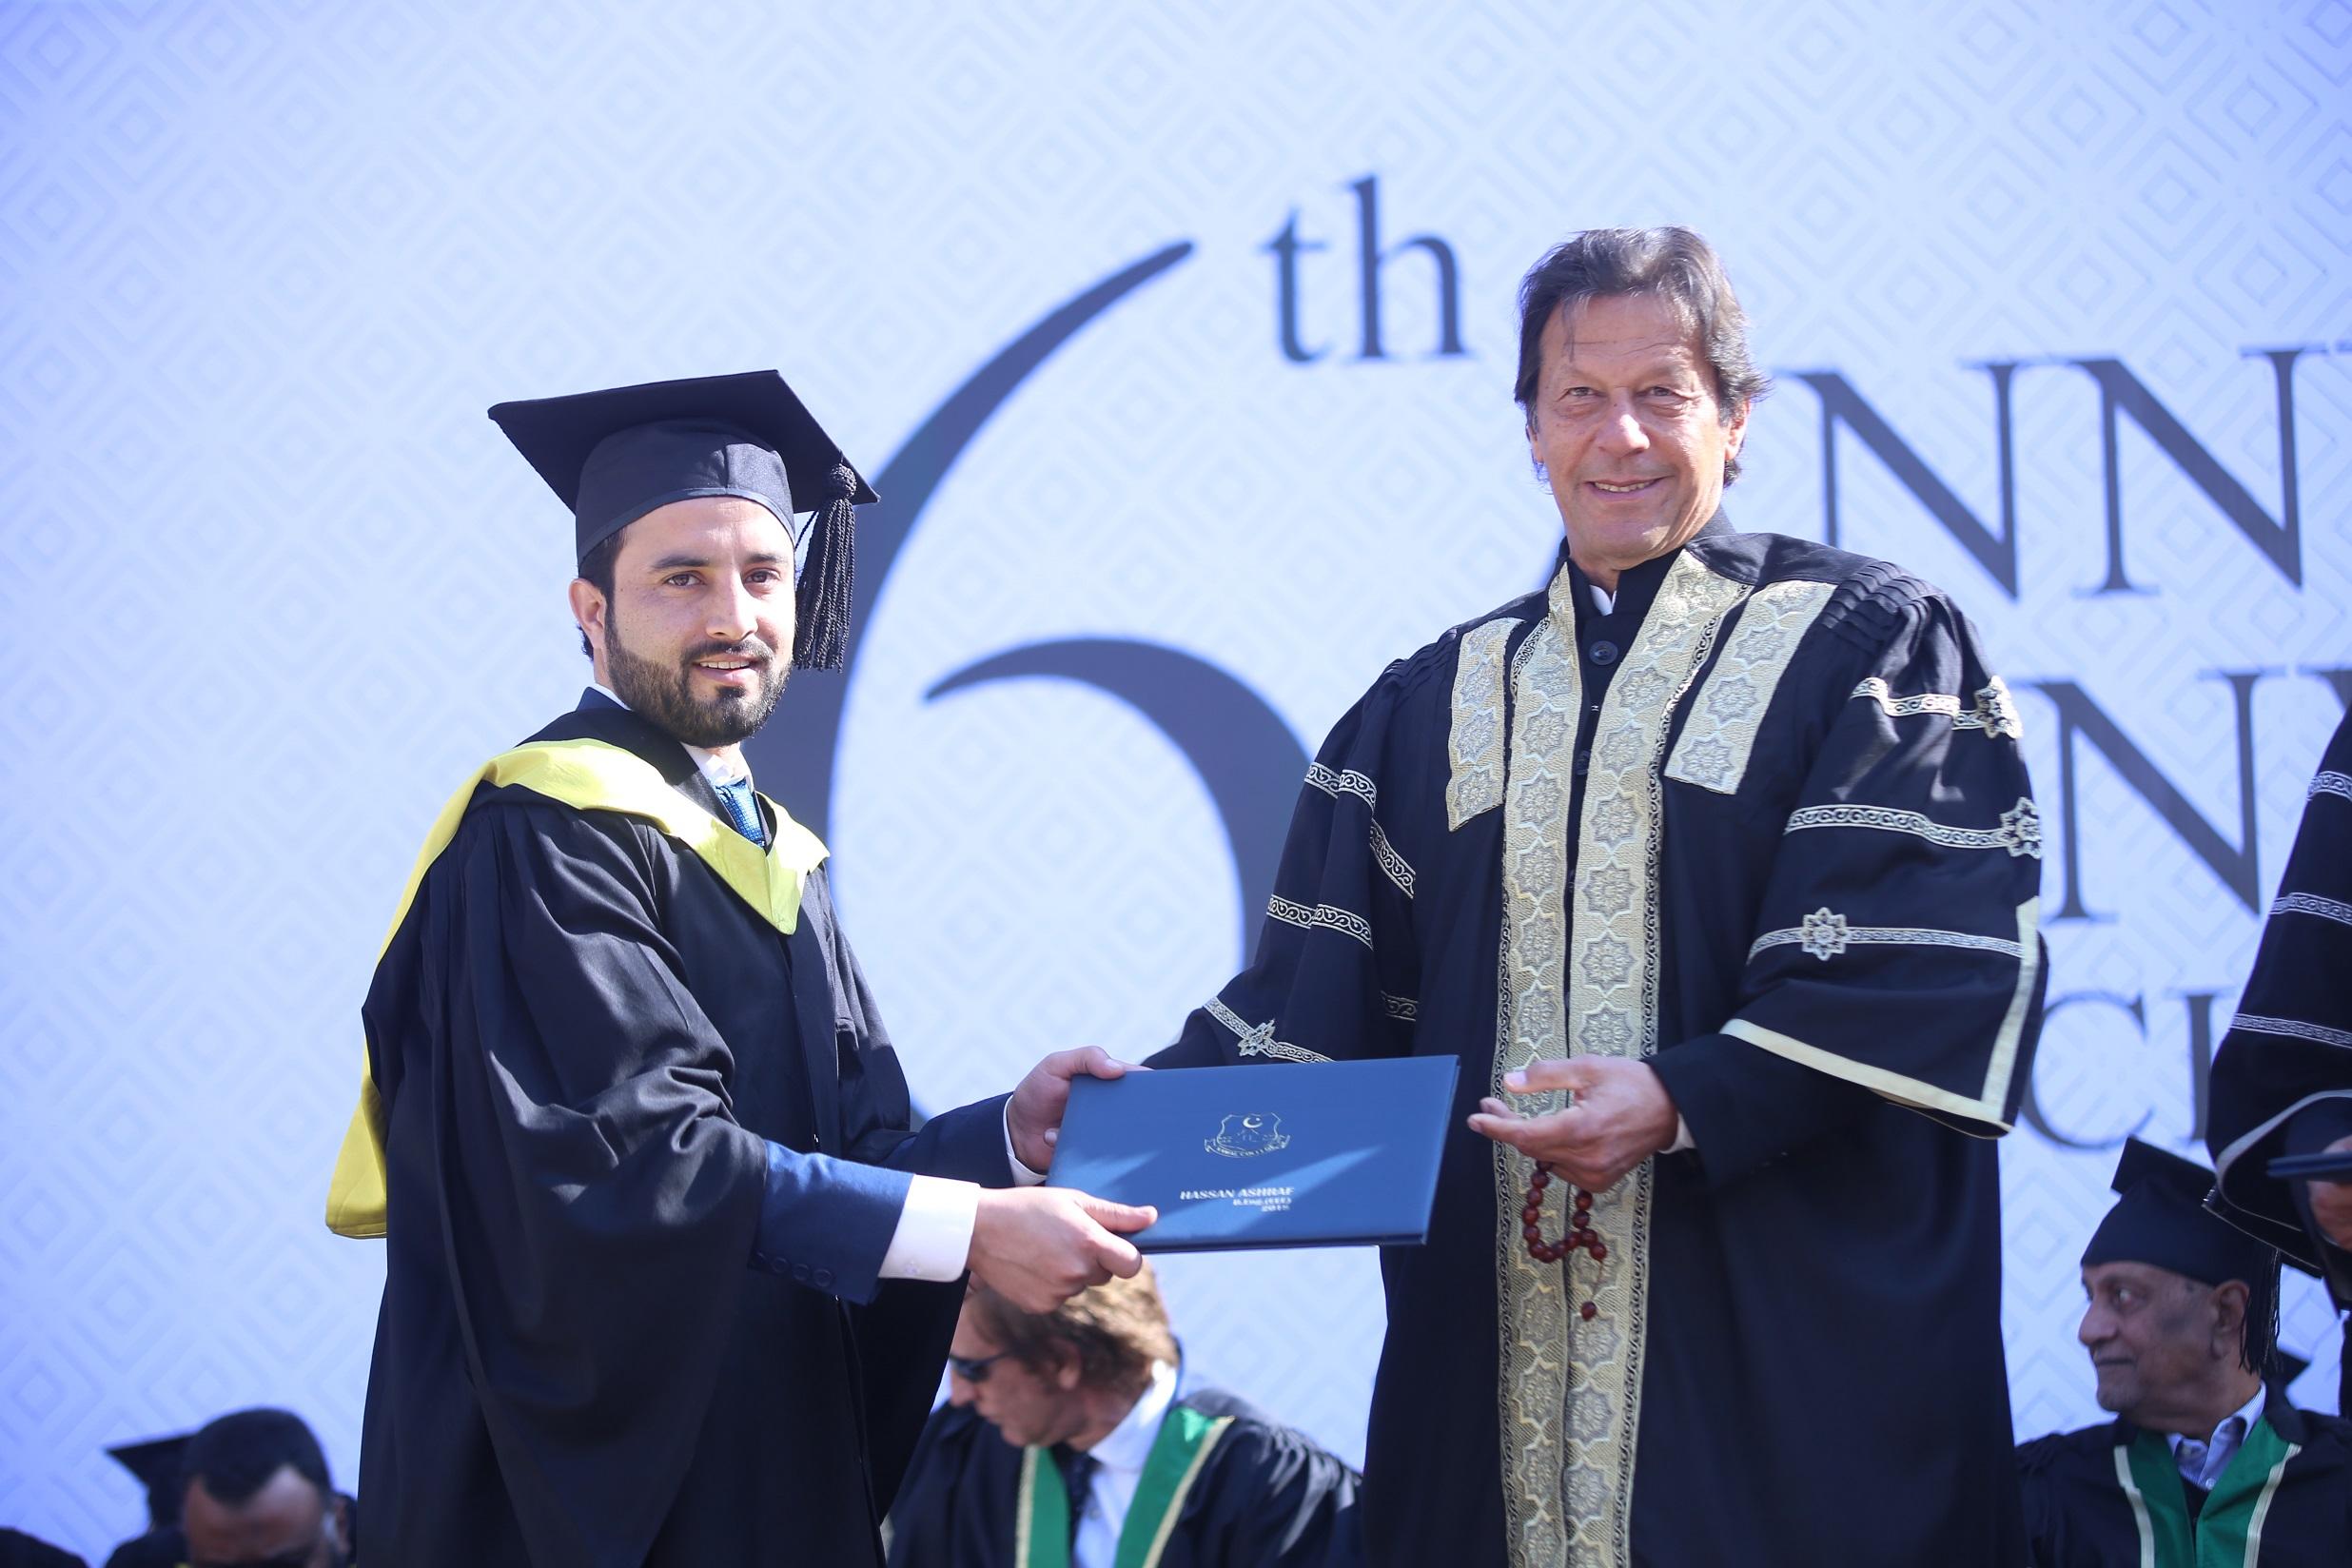 PRIME MINISTER IMRAN KHAN, CHAIRMAN, BOARD OF GOVERNORS OF NAMAL COLLEGE, AWARDS DEGREES TO NAMAL’S GRADUATE CLASS OF 2018 AND INAUGRATES NEW ACADEMIC BLOCK